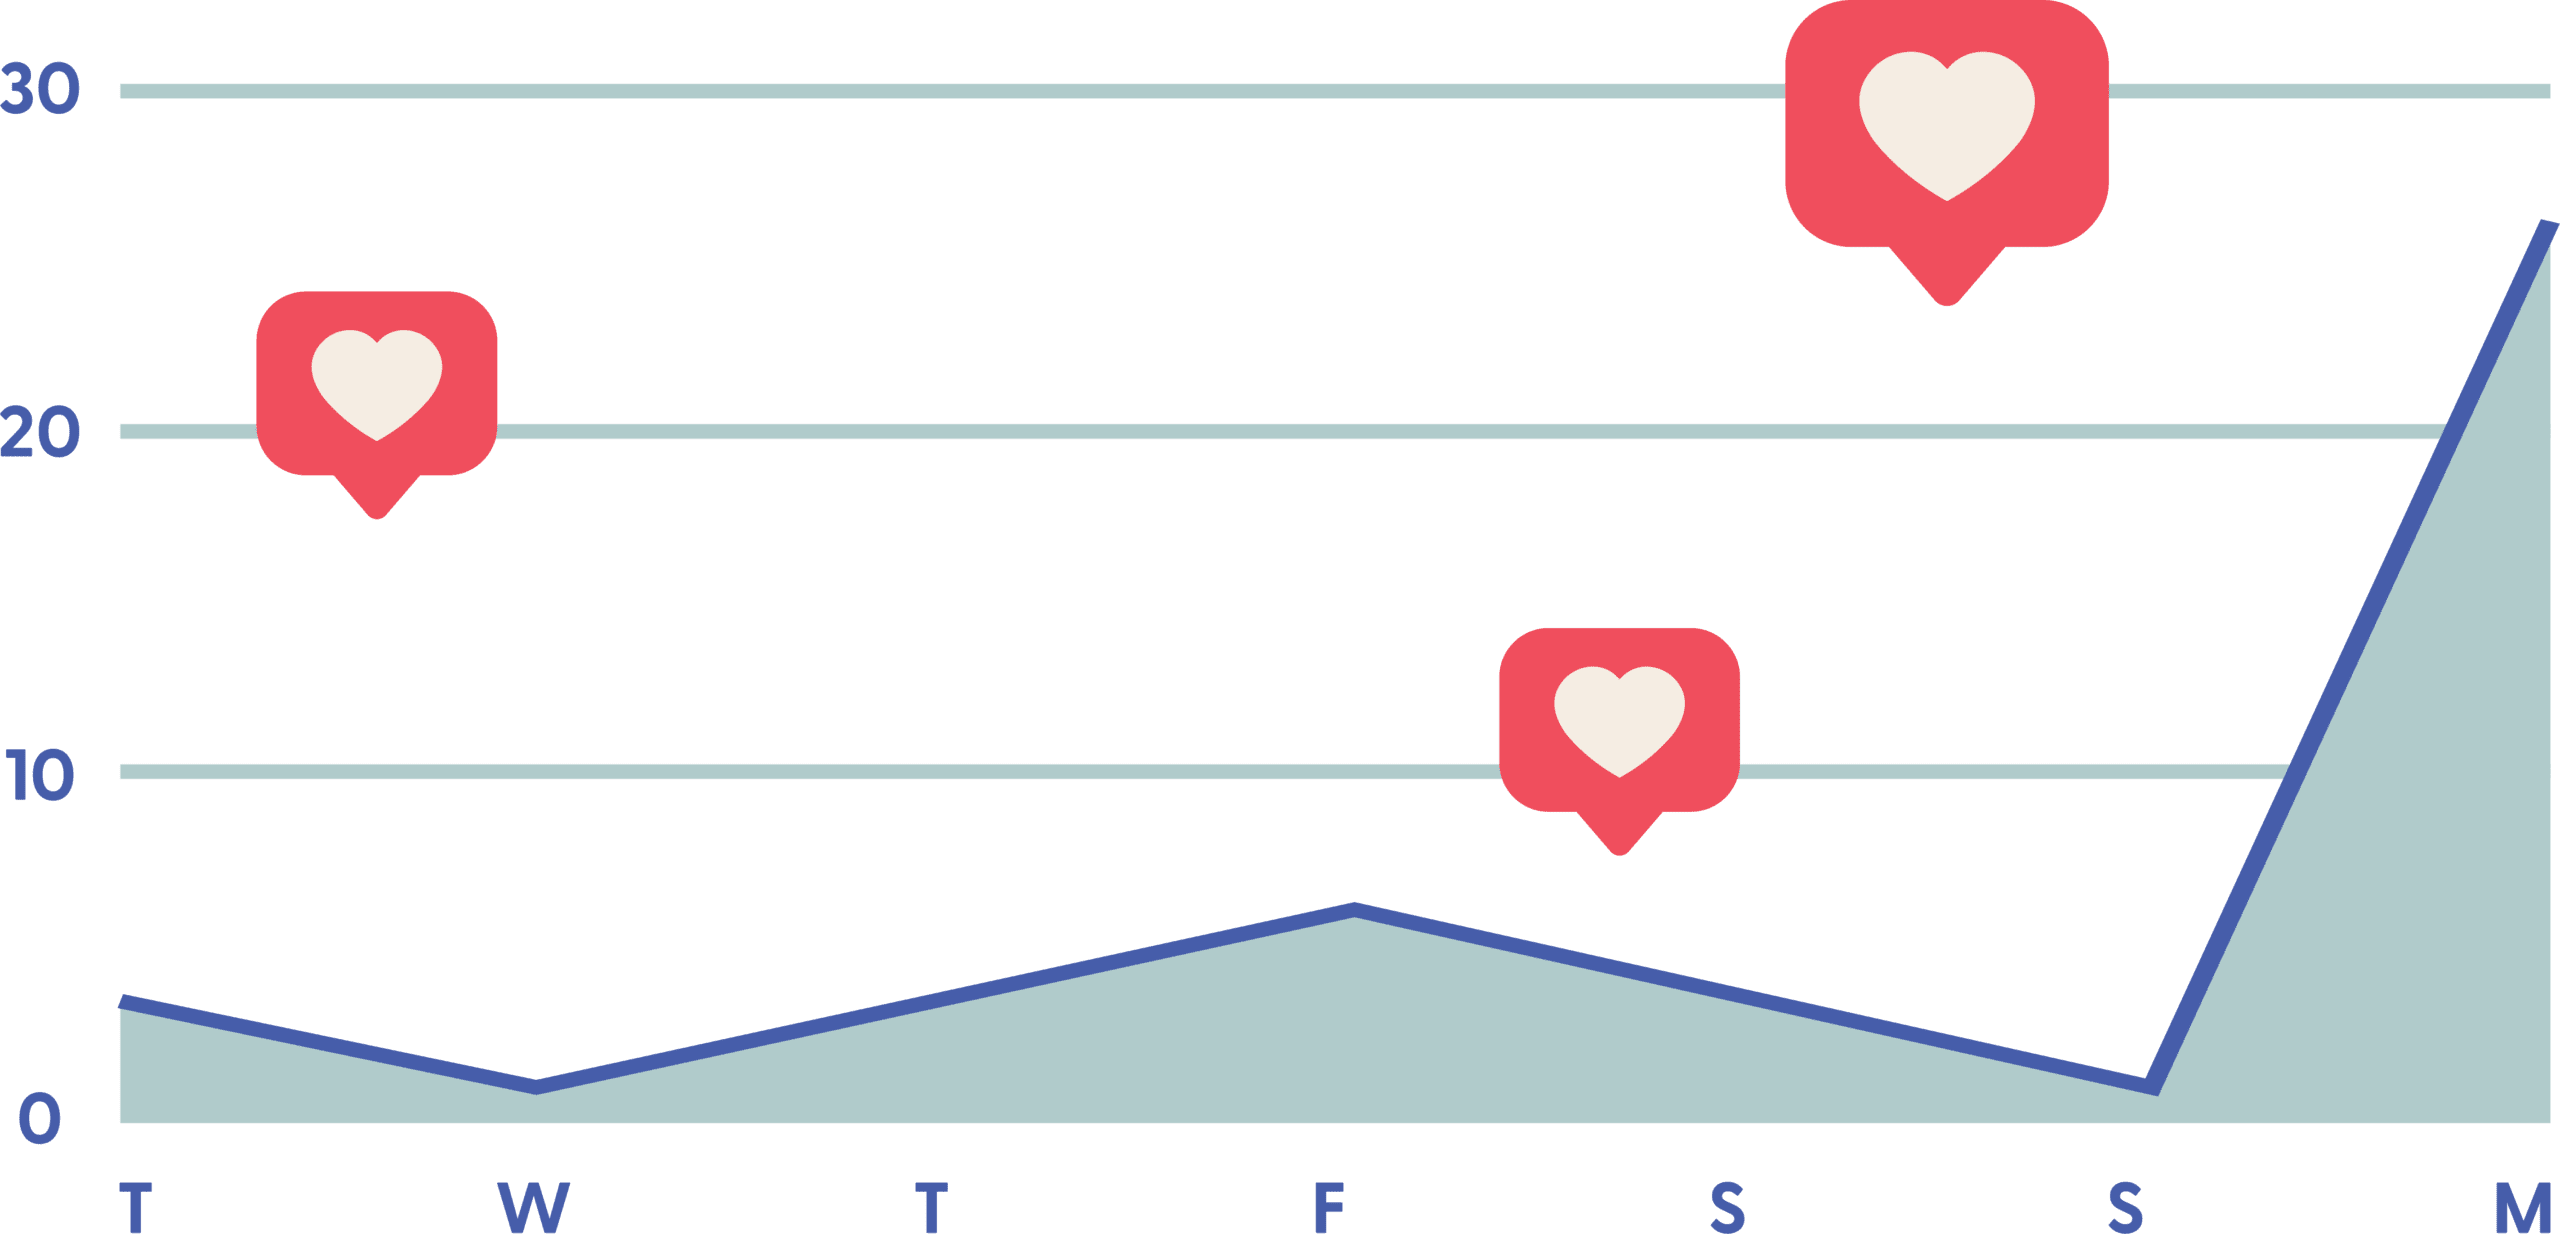 Illustration of a graph, reading 0-30 upwards, and Tuesday to Monday along the bottom. Hearts representing social "likes" are floating on this graph.